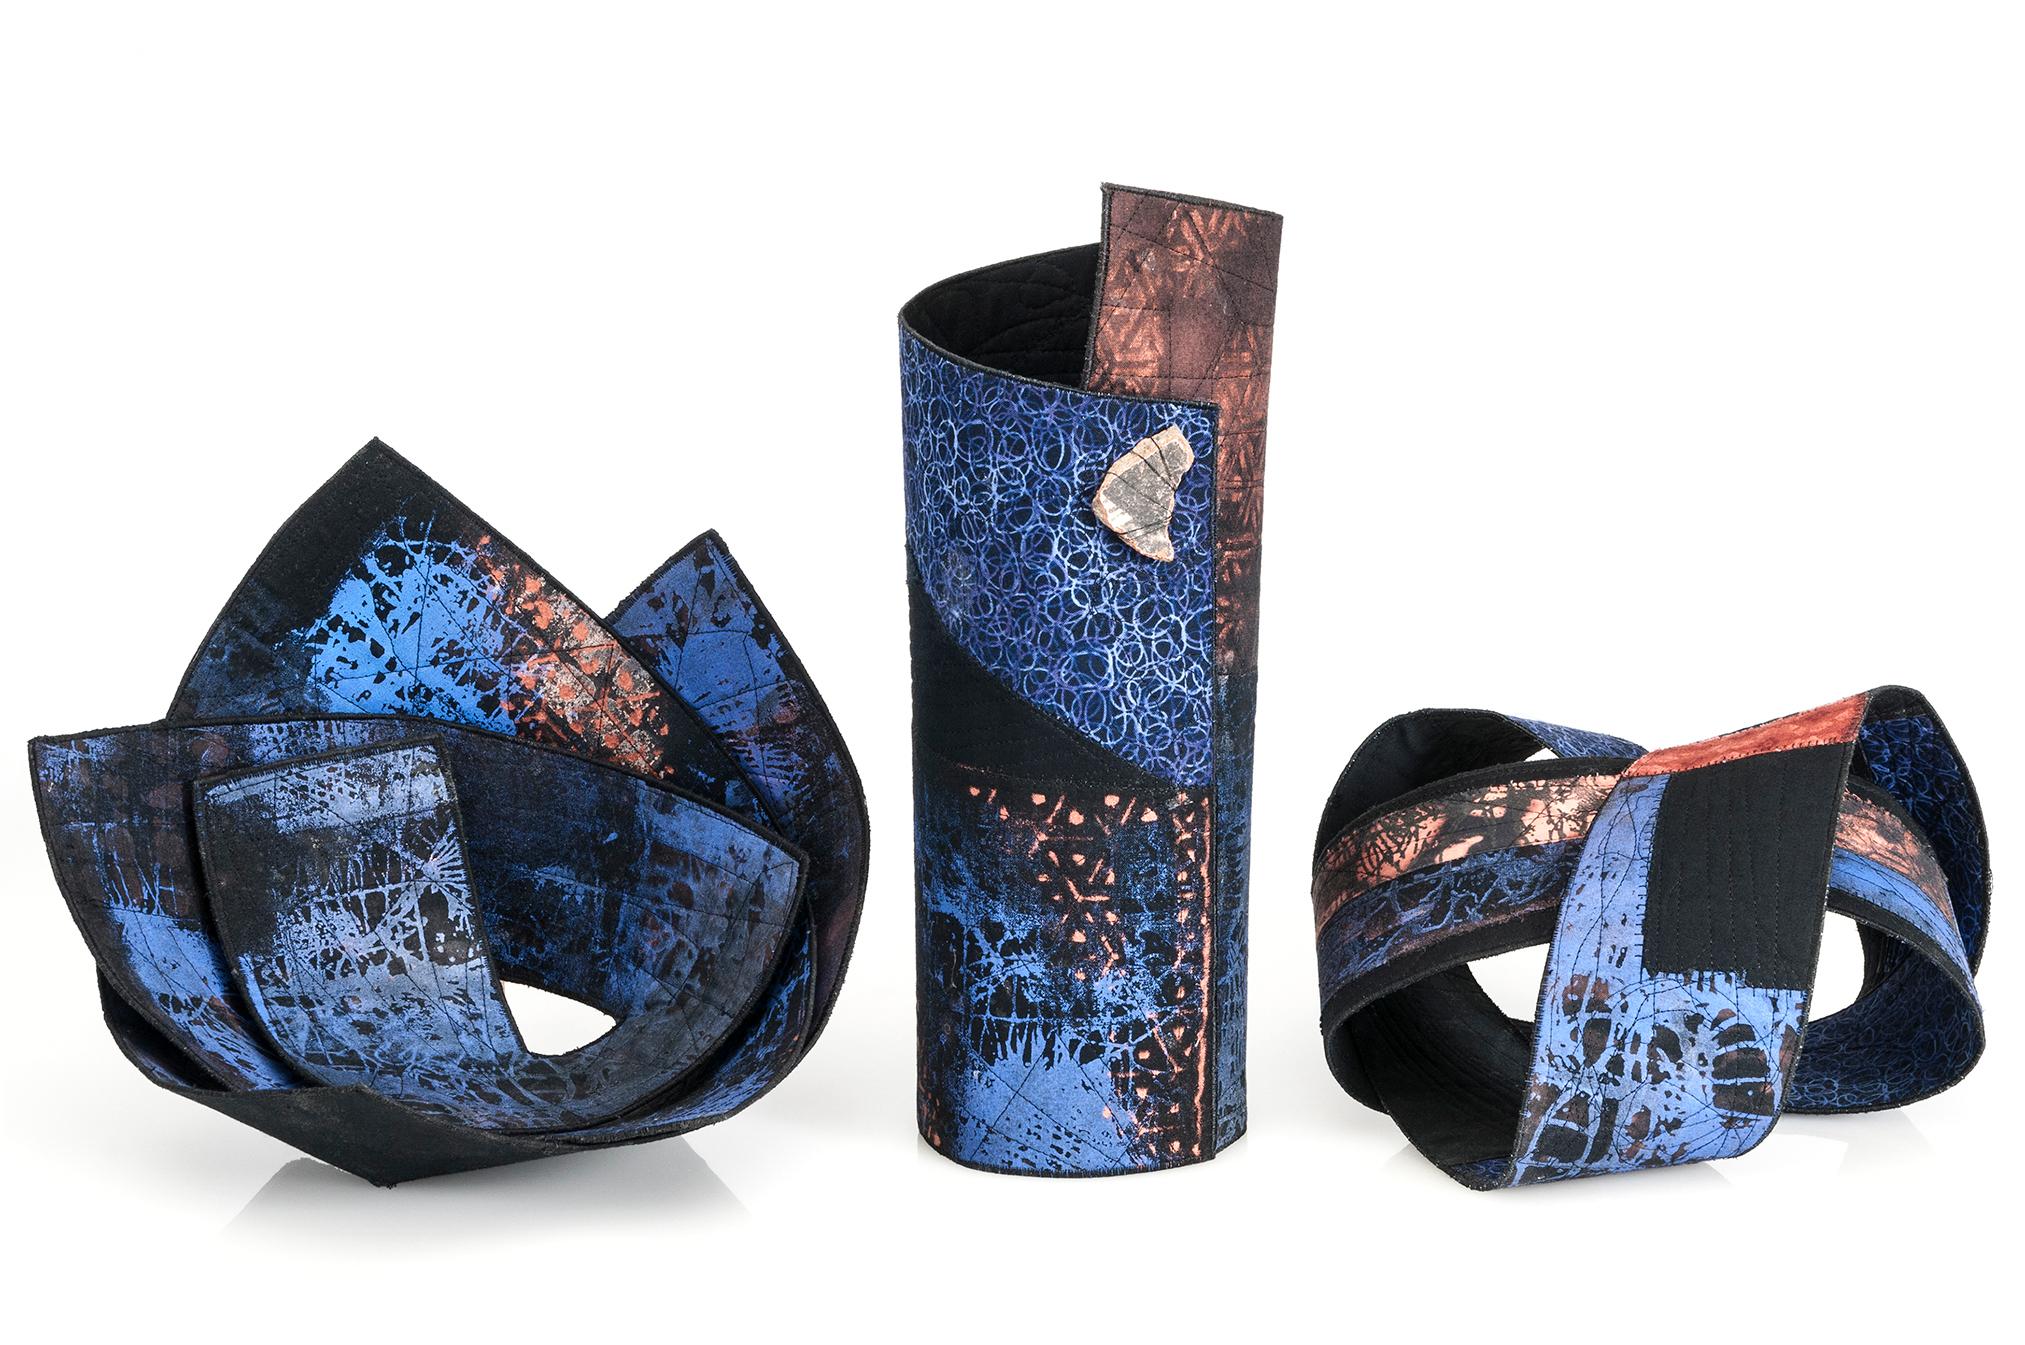  Viviana  Lombrozo - Vessels to Hold Fleeting Moments (Consists of 3 pieces)